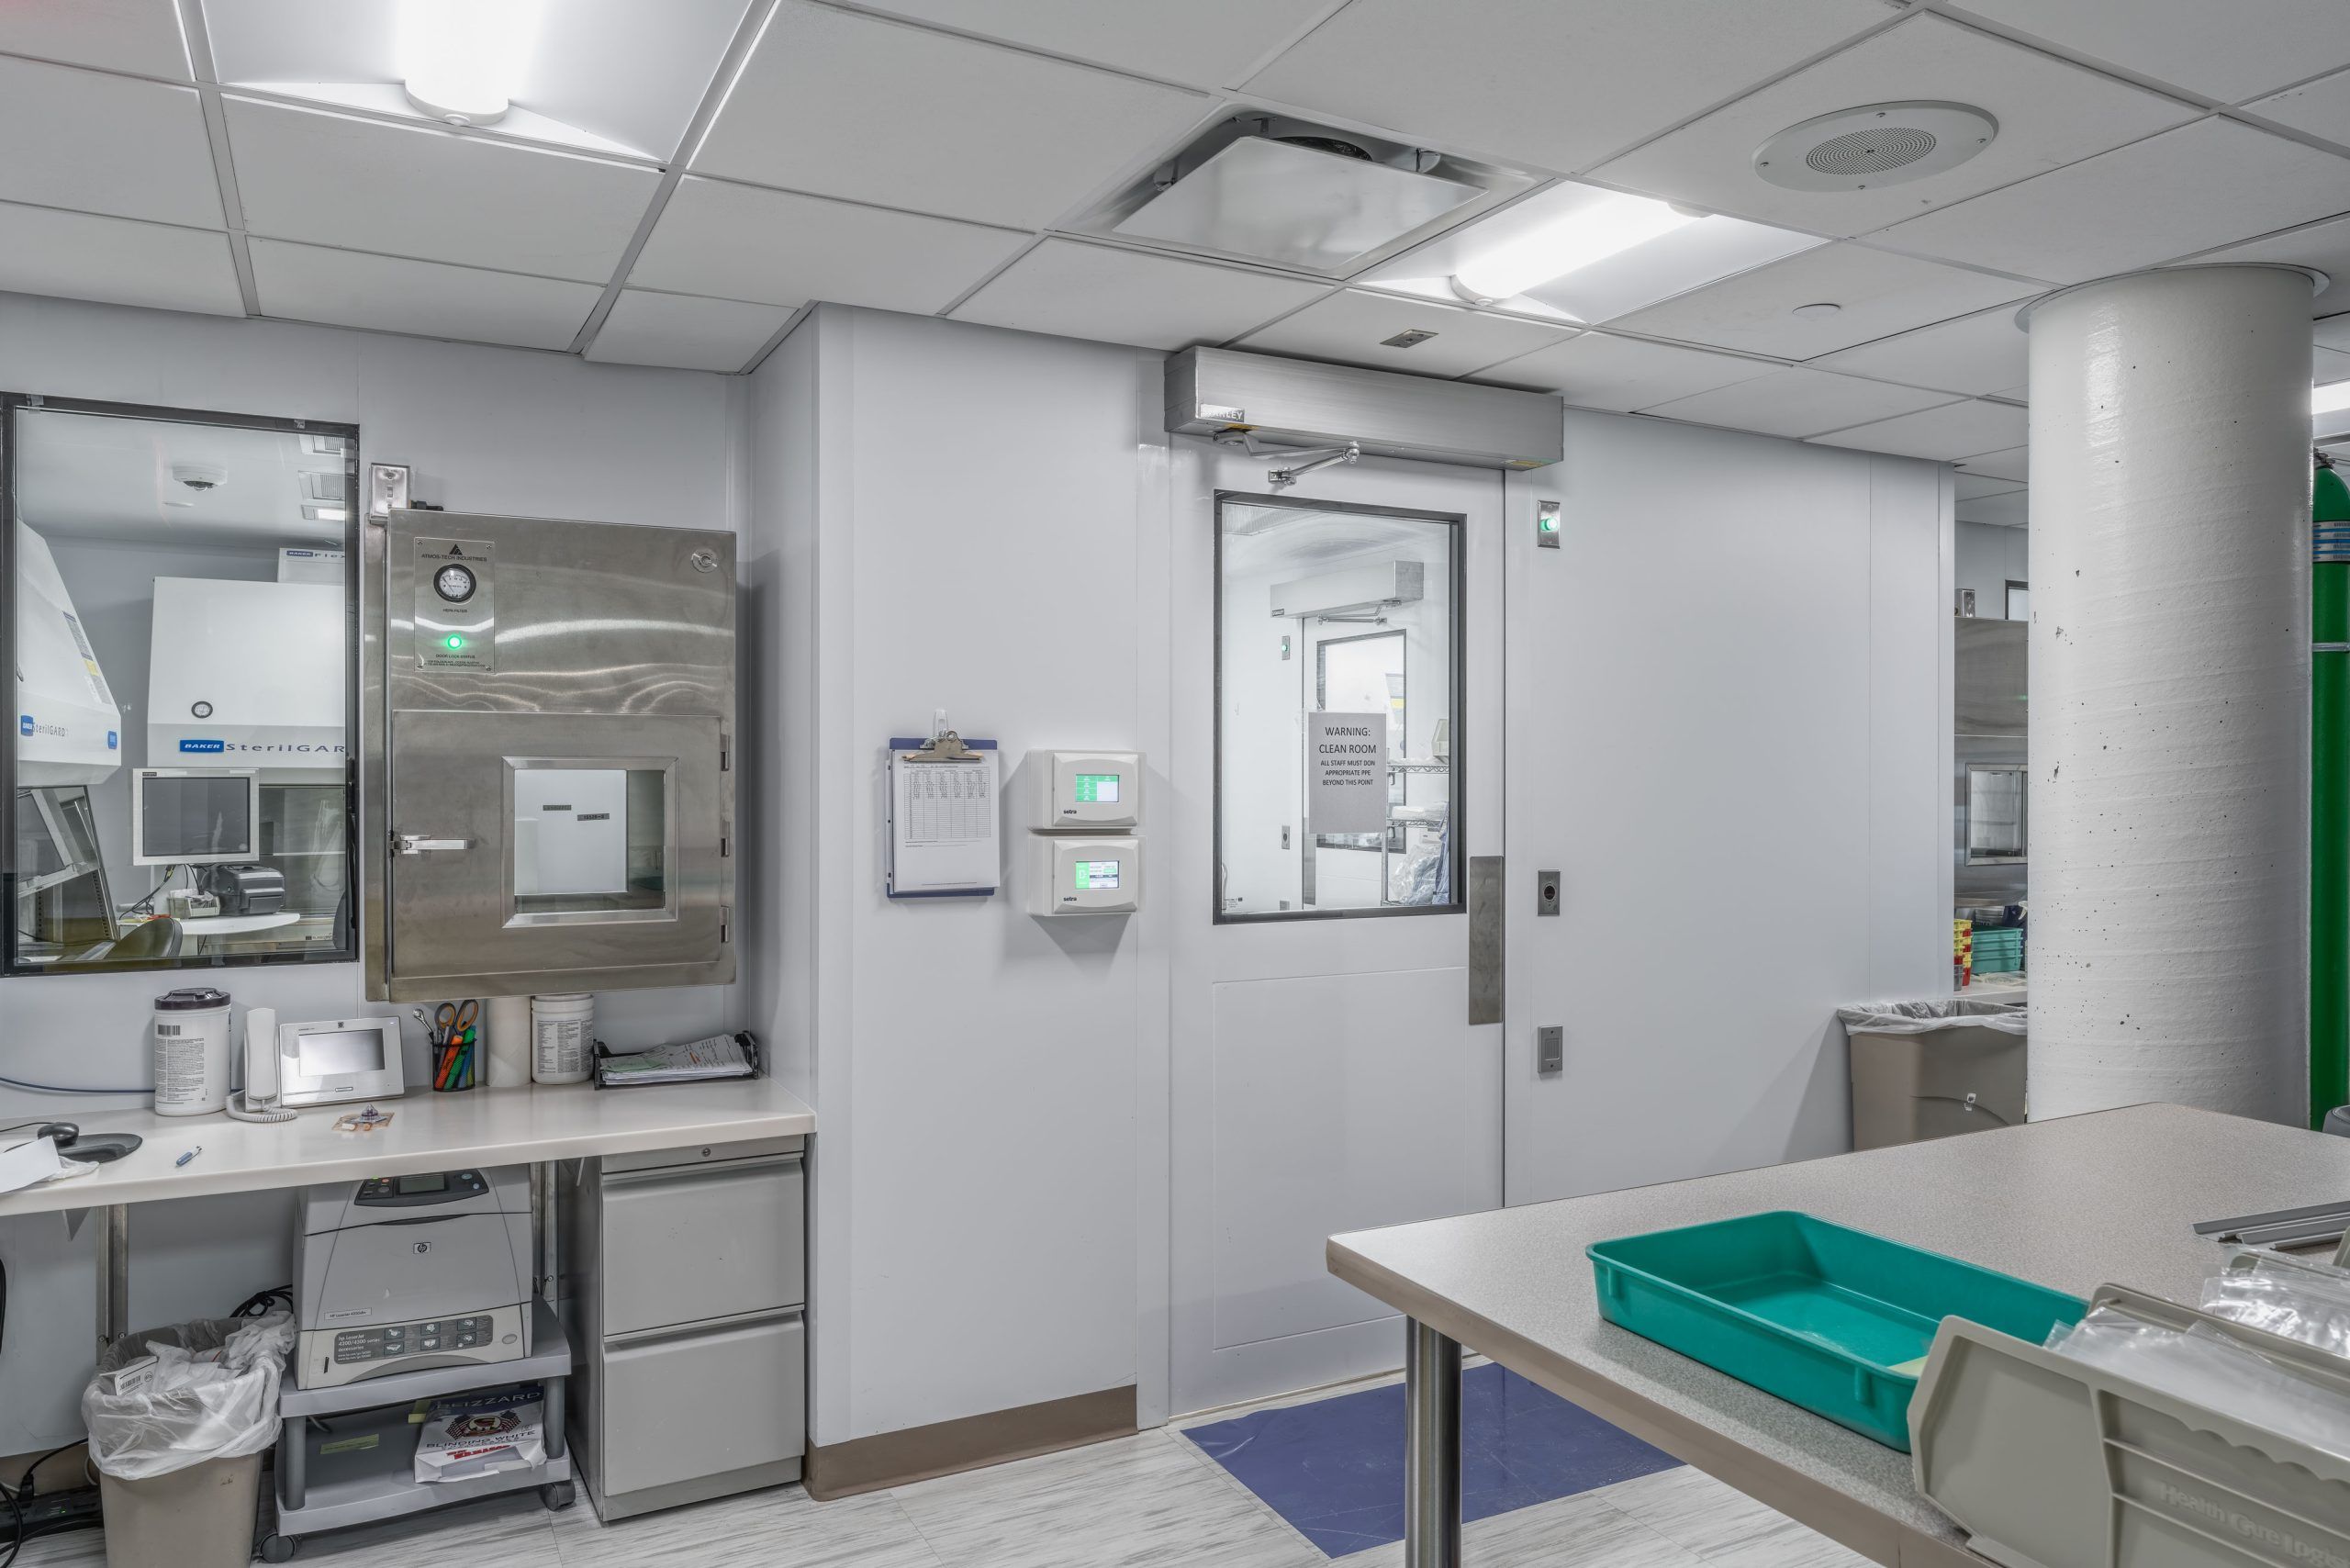 CLEANROOM AND COMPOUNDING PHARMACY EXPANSION COMPLETED BY WISE CONSTRUCTION FOR COMMUNITY HOSPITAL